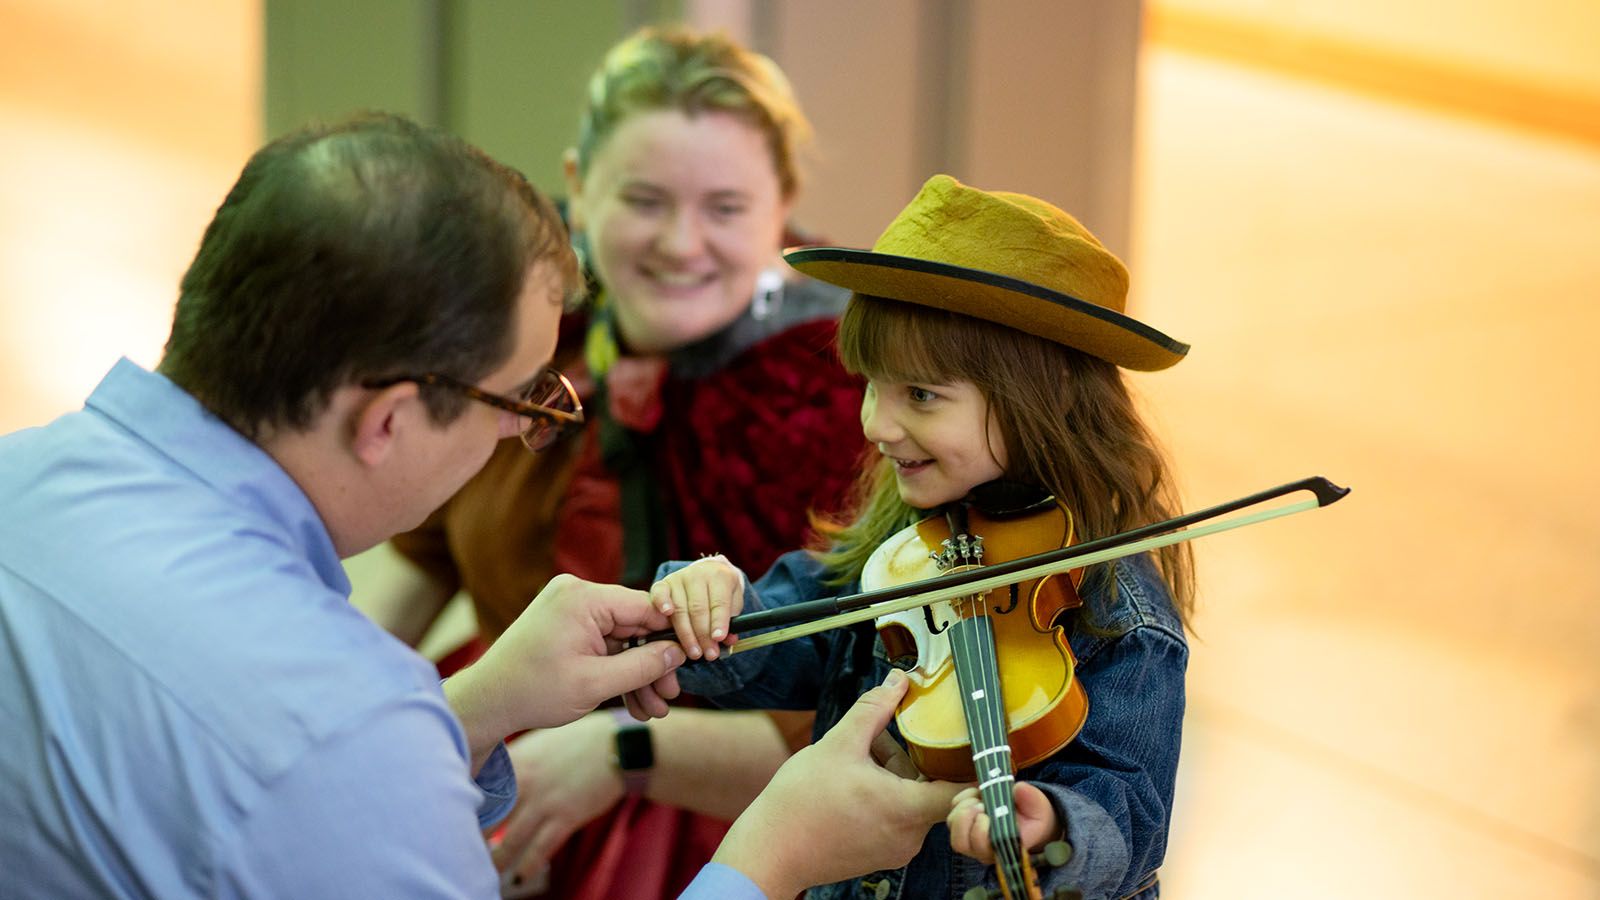 Johnny Appleseed Goes to the Symphony on April 6 is part of Fort Wayne Philharmonic's Family Series.